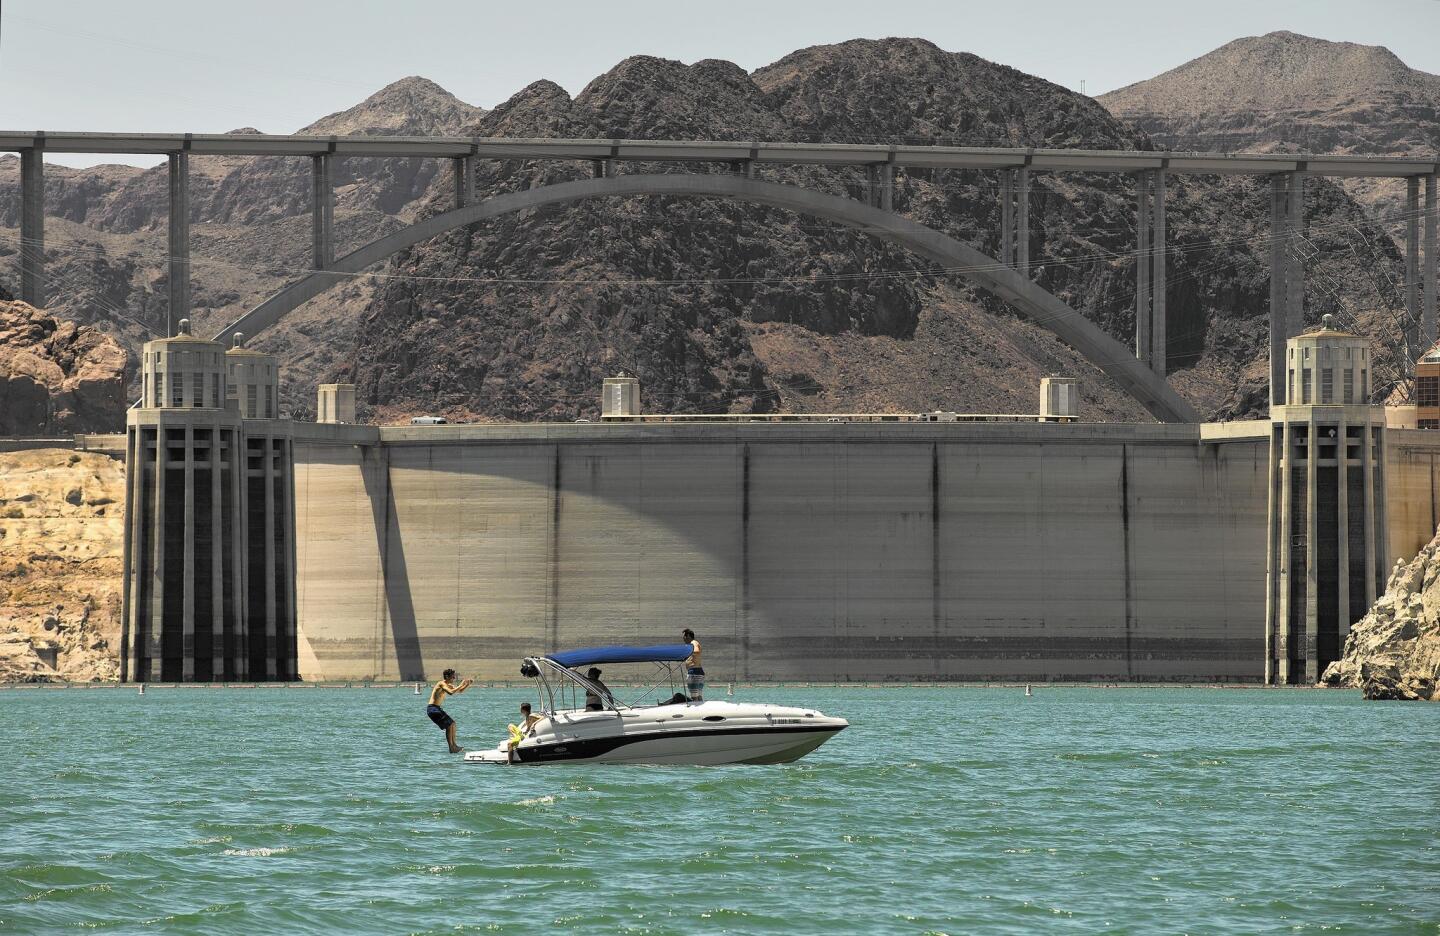 Lake Mead, created by the Hoover Dam, entices boaters to take a plunge on a July day. The reservoir doubles as a recreation area.